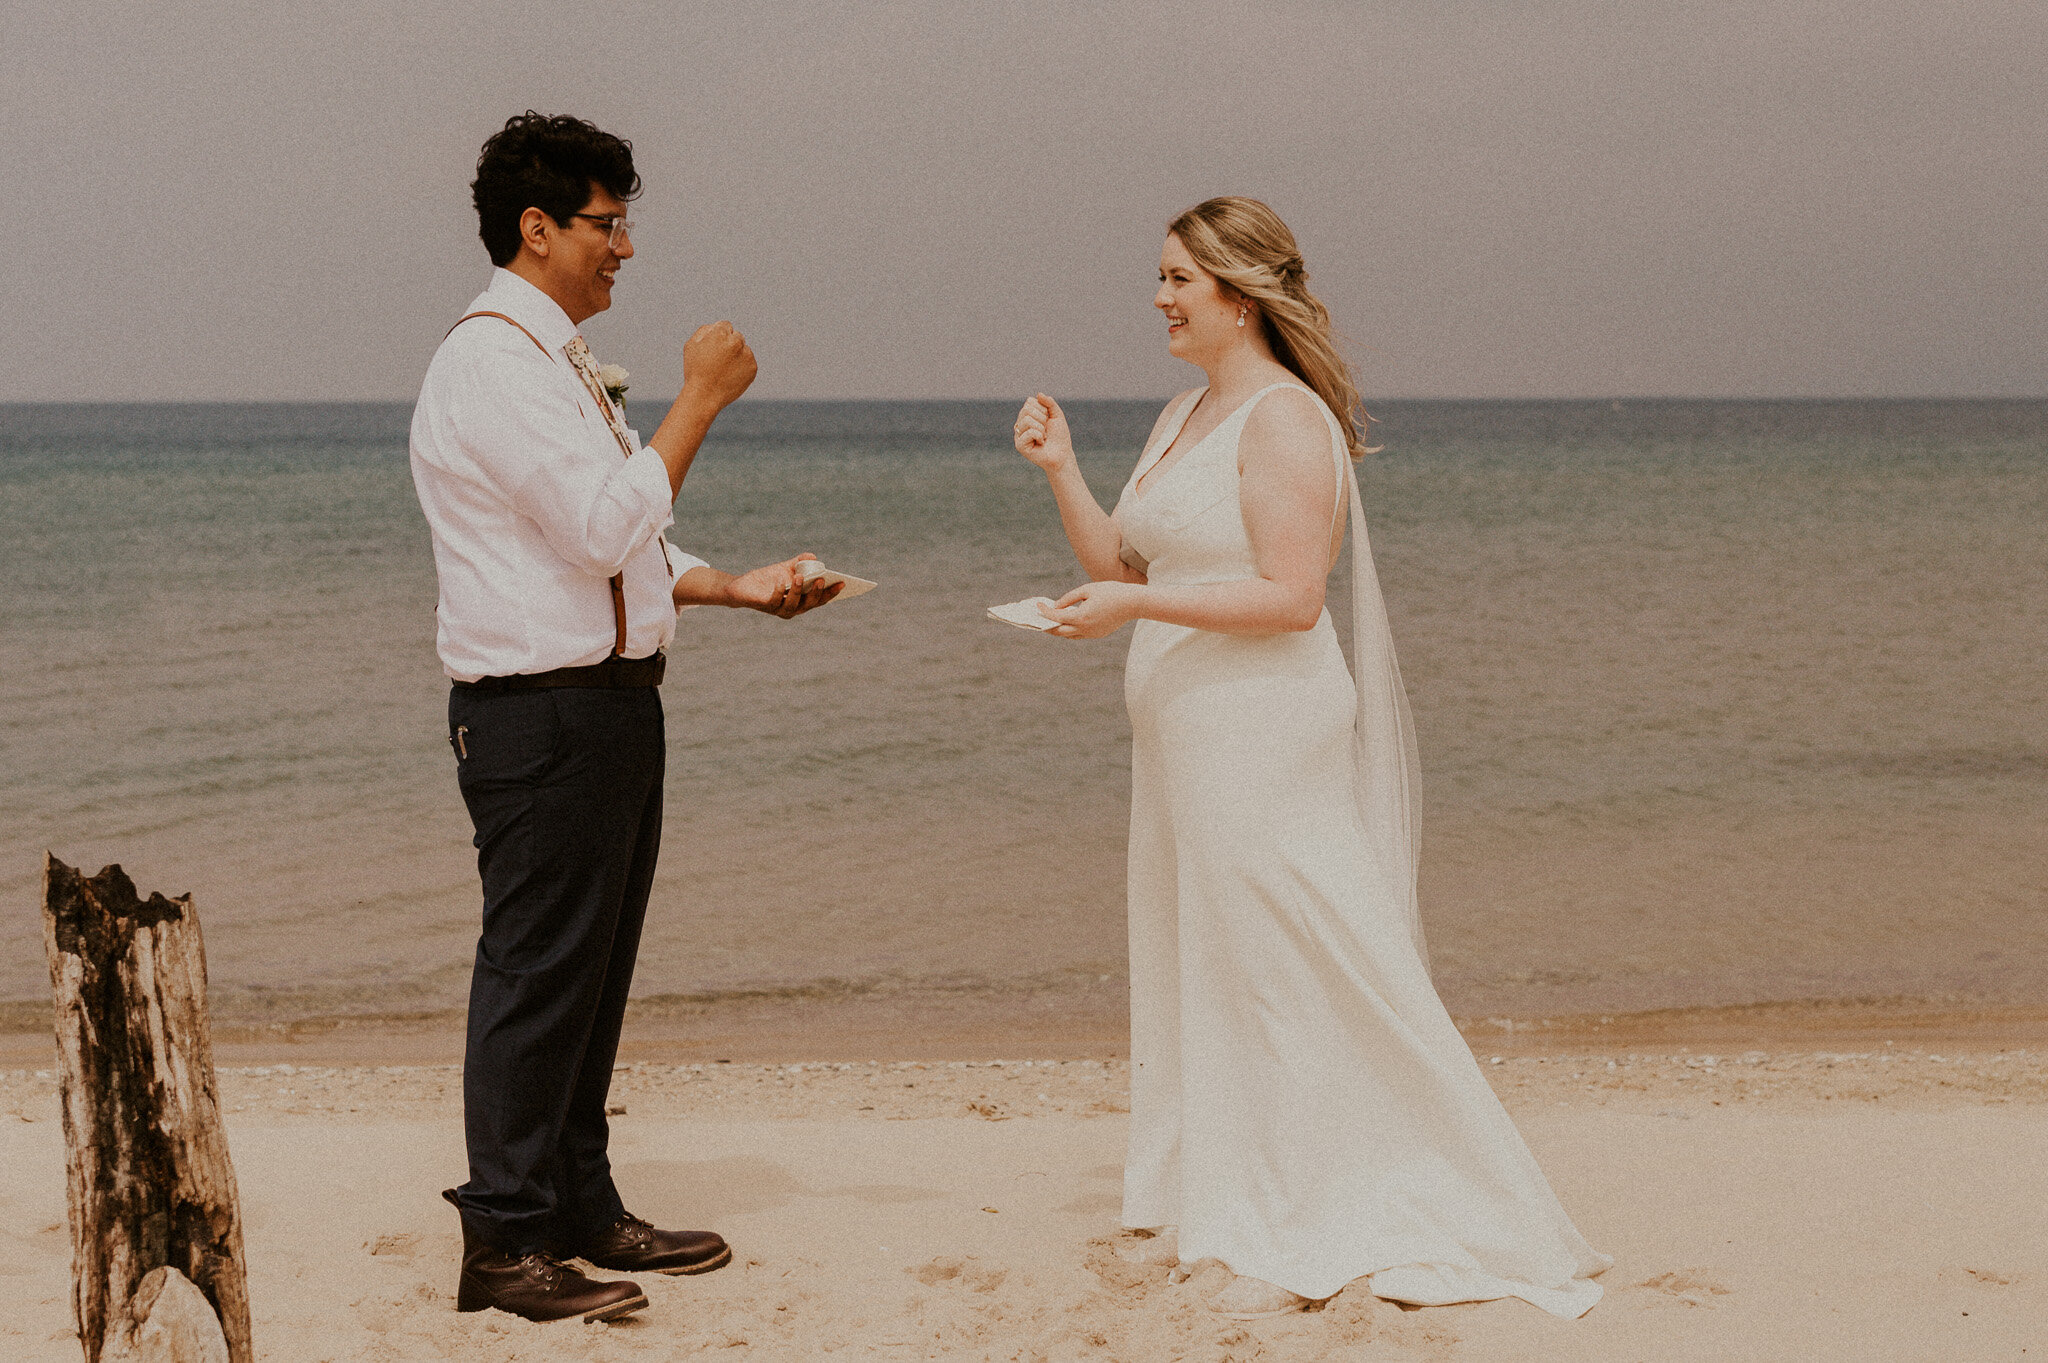 Lauren and Miguel played rock-paper-scissors to decide who would read their vows first